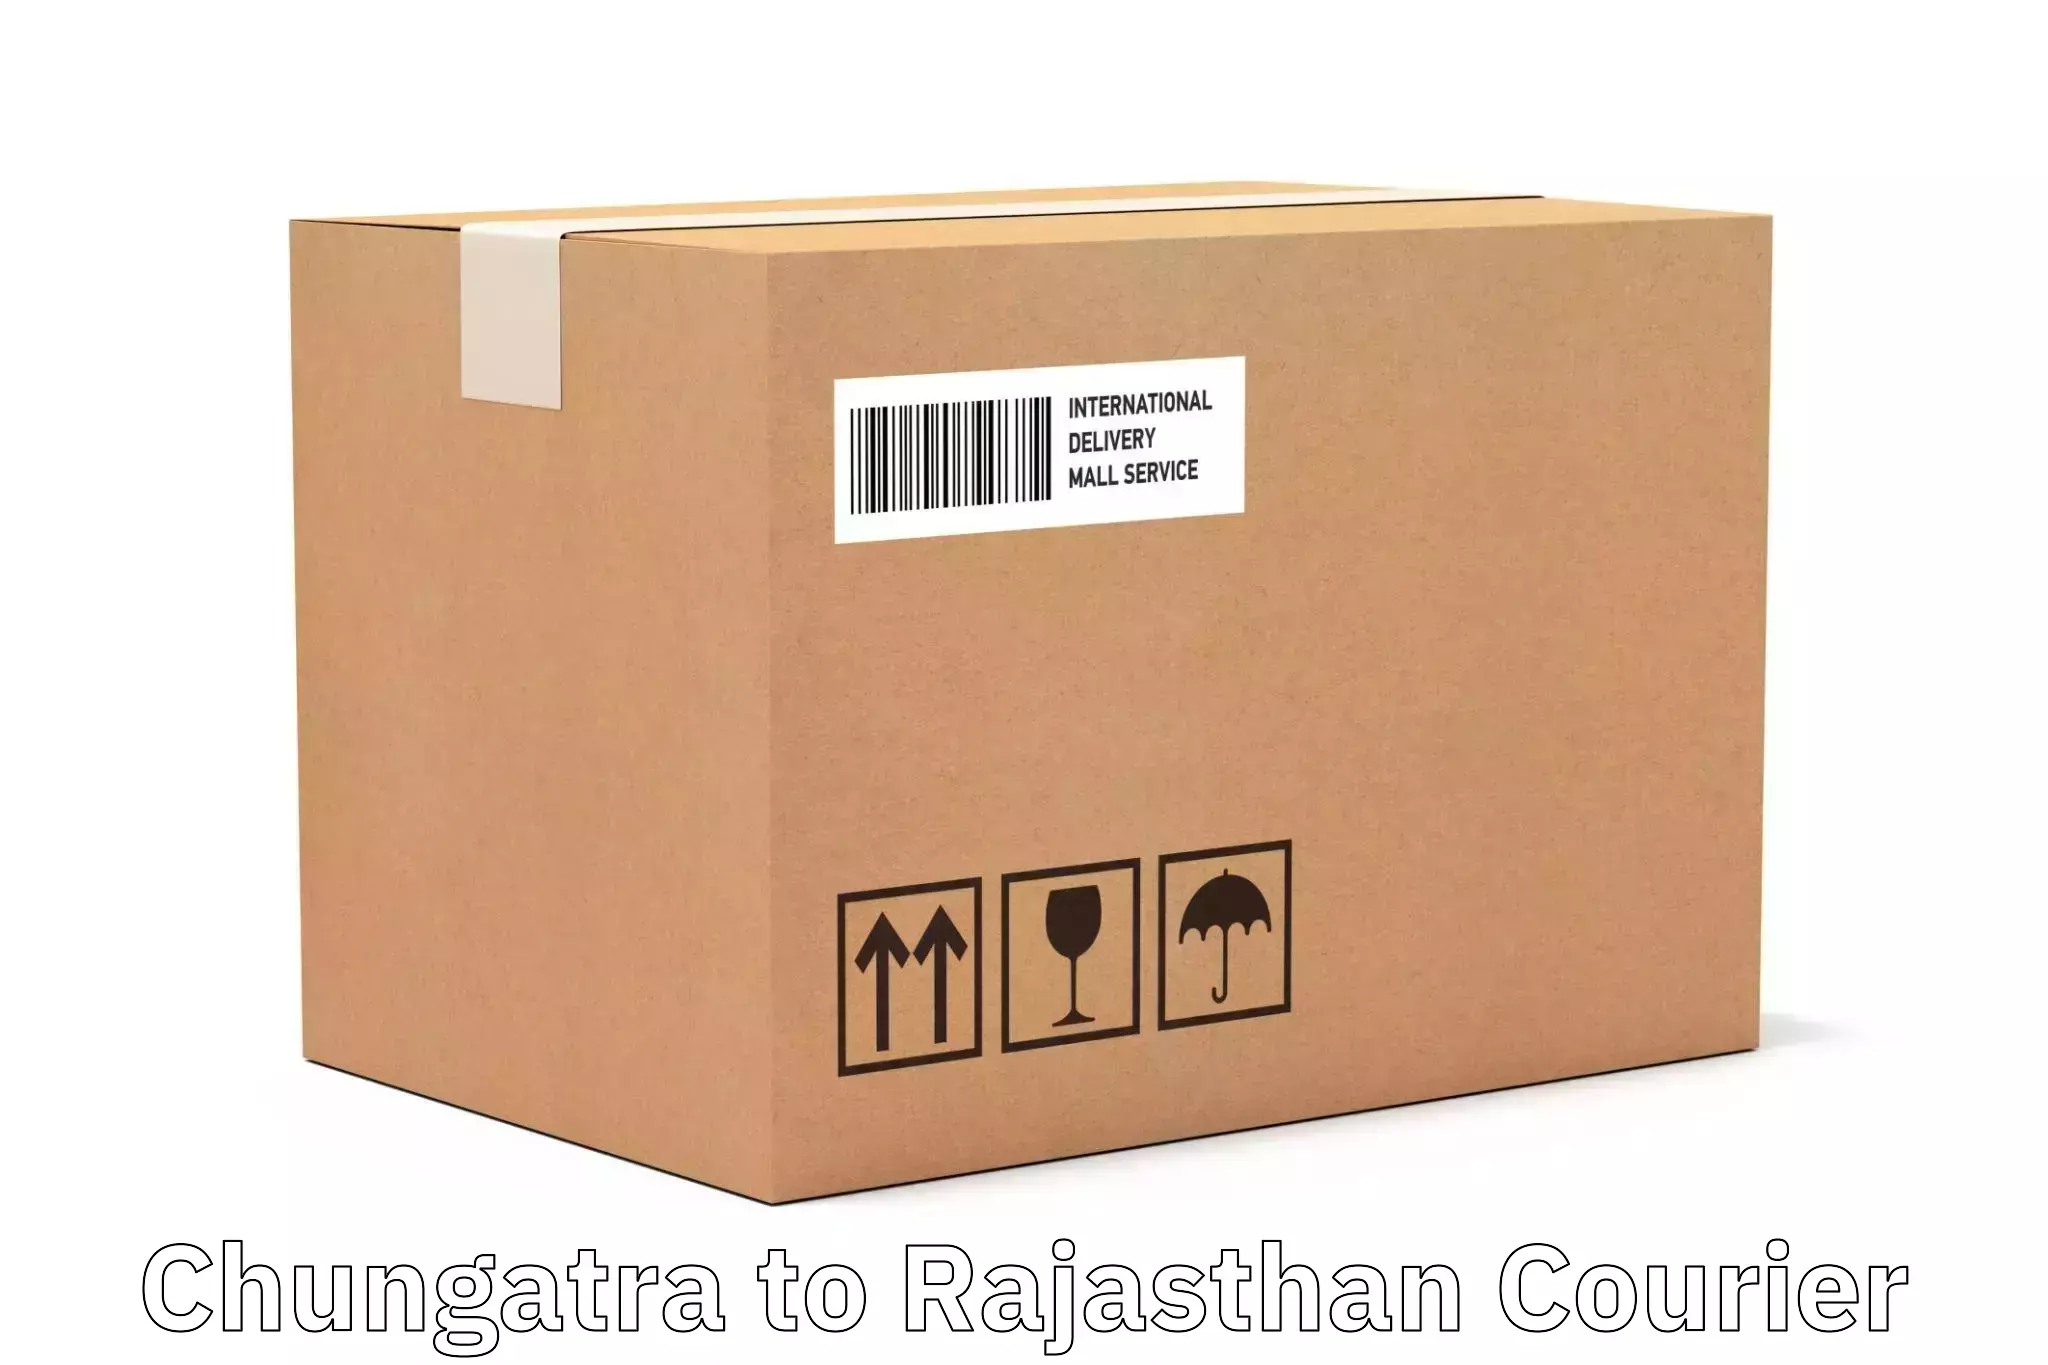 Online package tracking in Chungatra to Laxmangarh